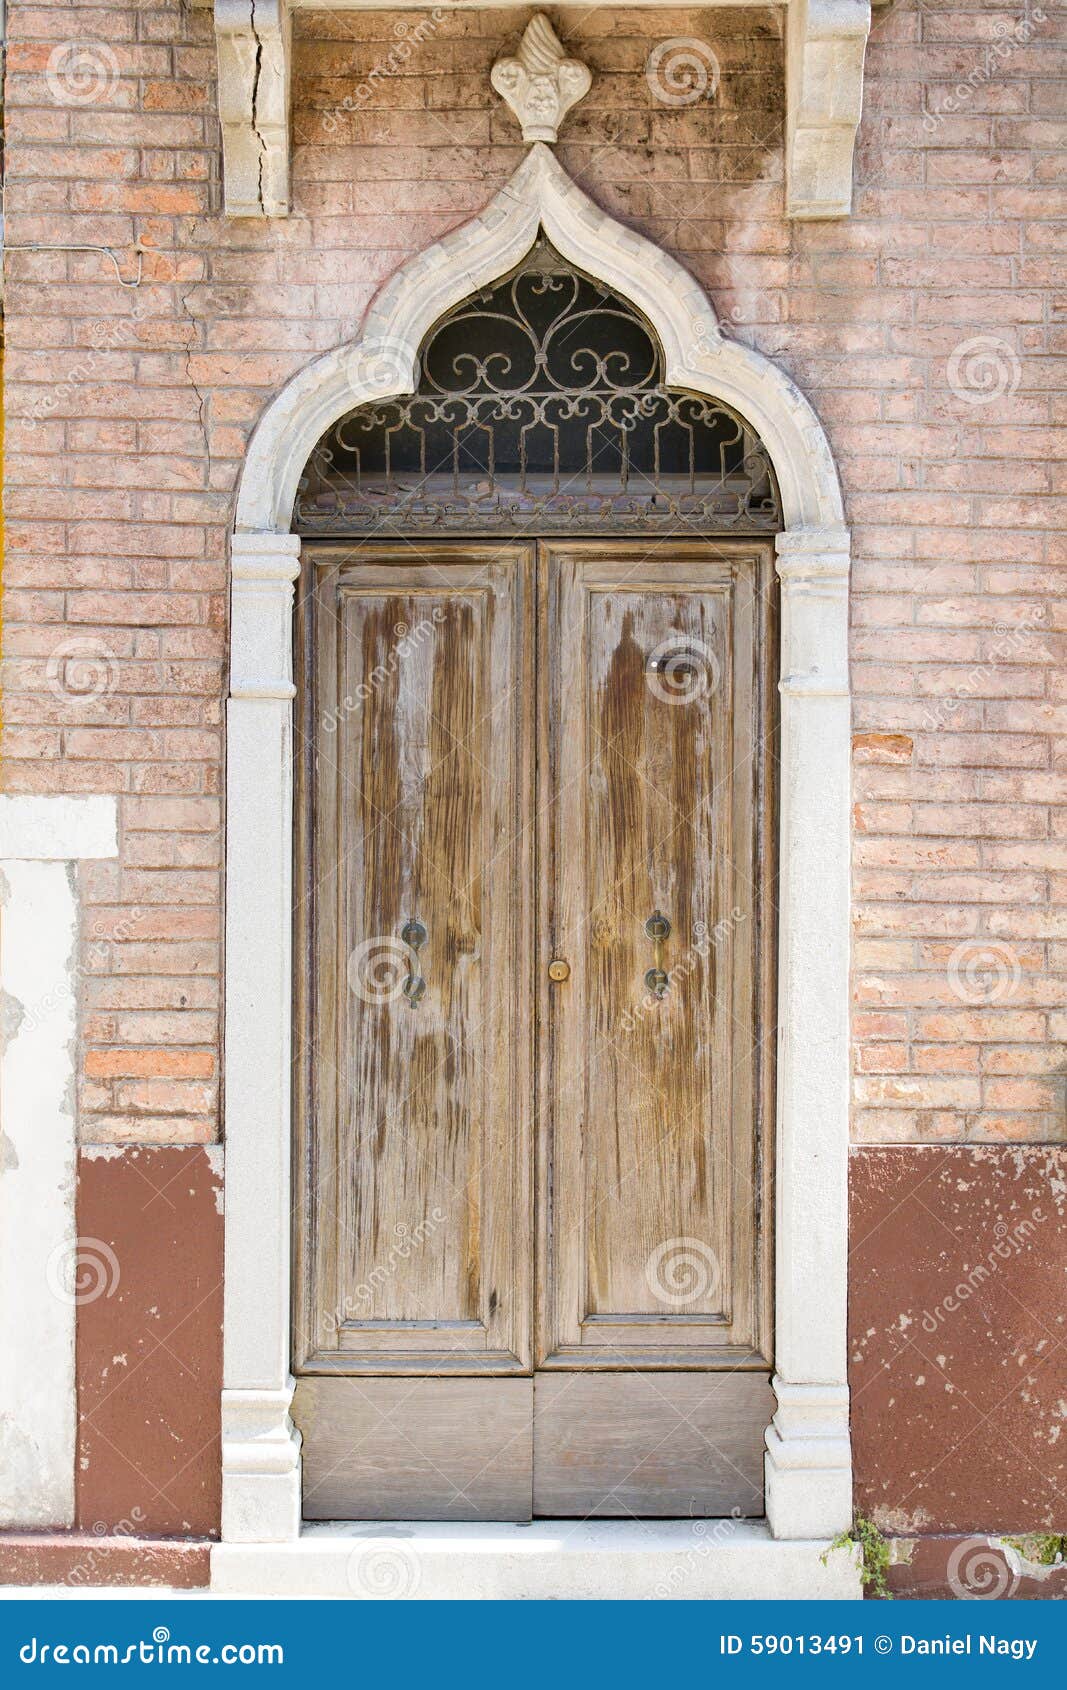 Weathered, Old Wooden Gate with Fretwork Stock Image - Image of brick ...